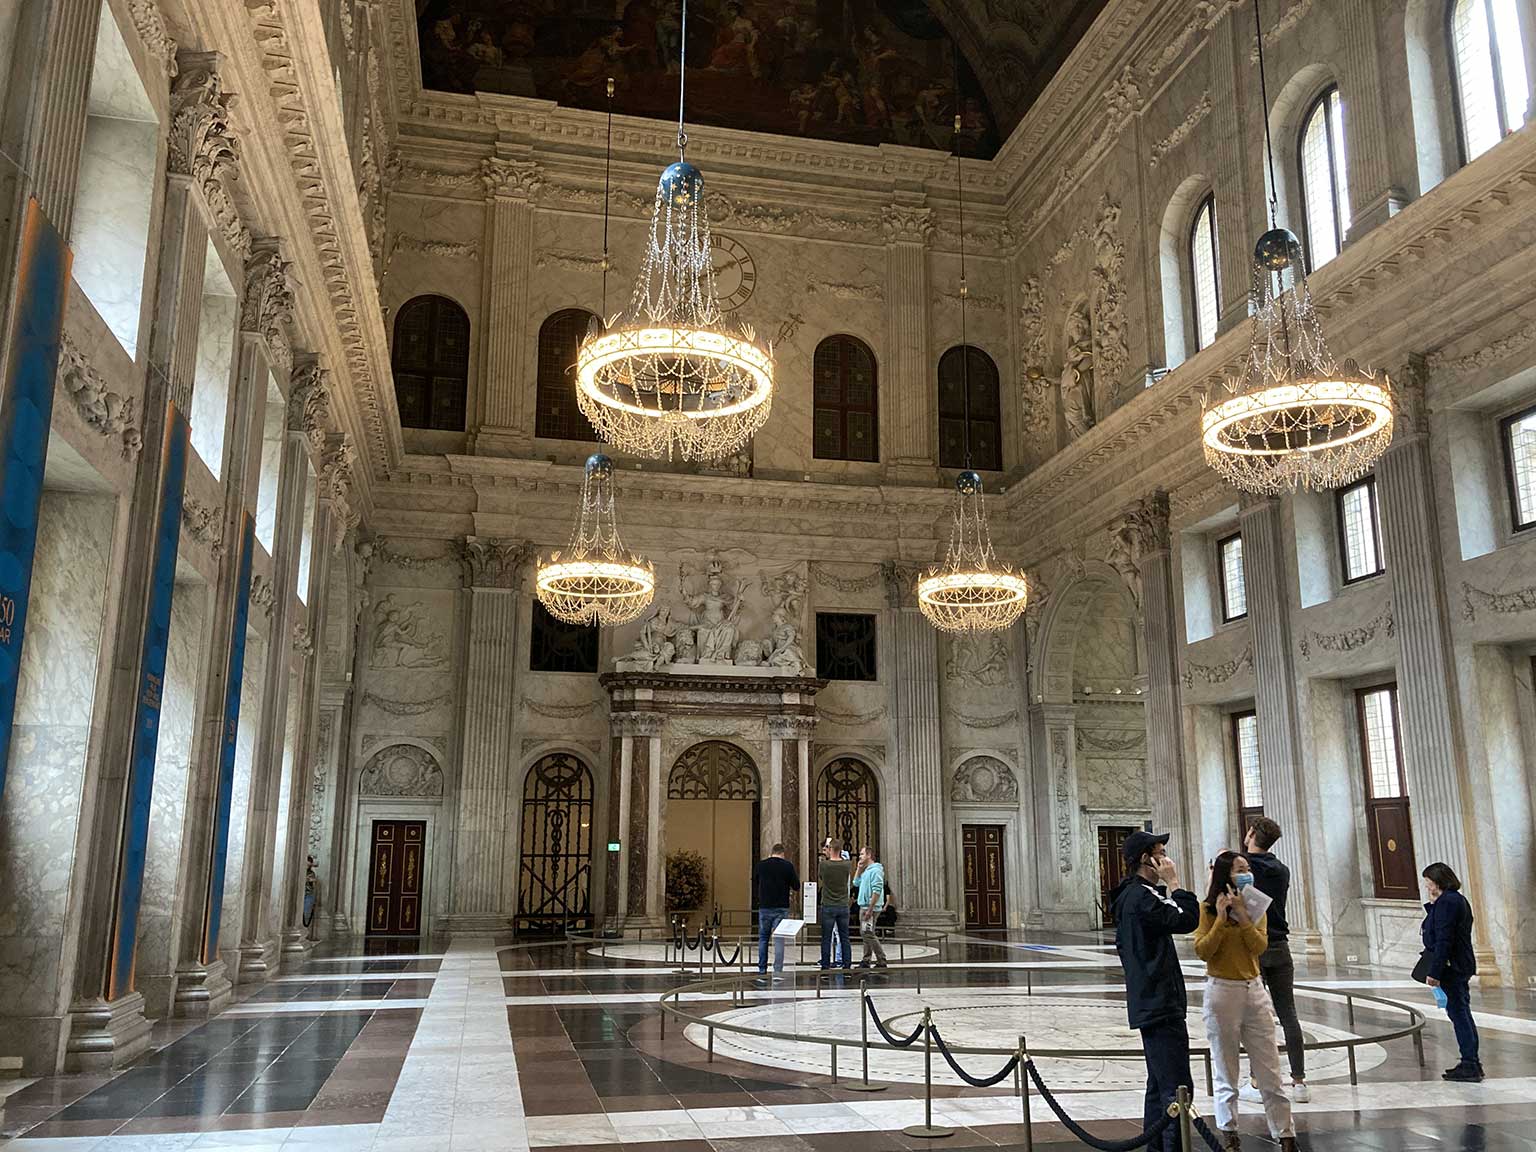 Burgerzaal (Citizens’ Hall) inside the Royal Palace, Amsterdam